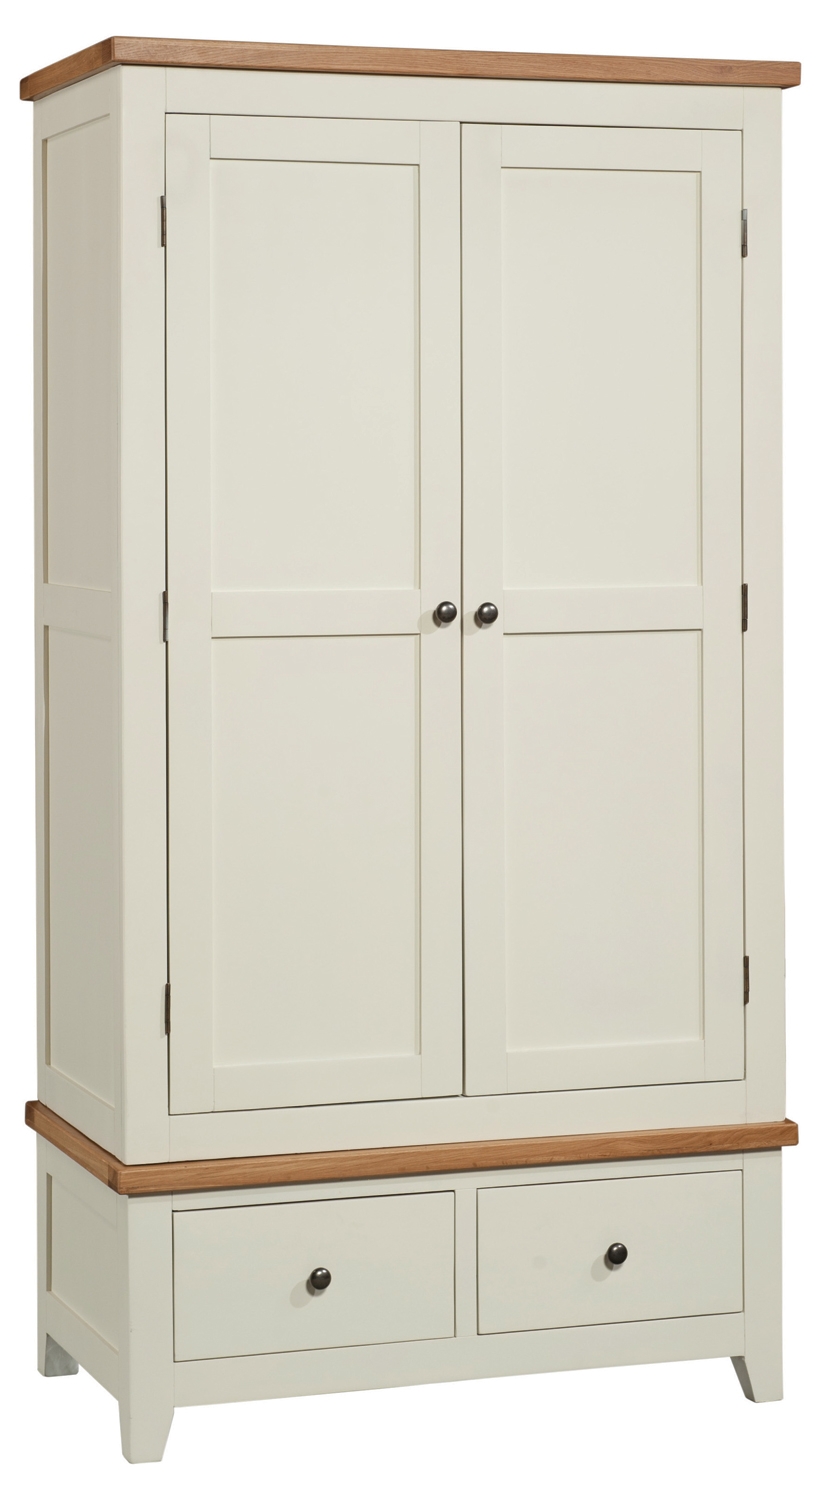 Henley Painted Double Wardrobe with 2 Drawers